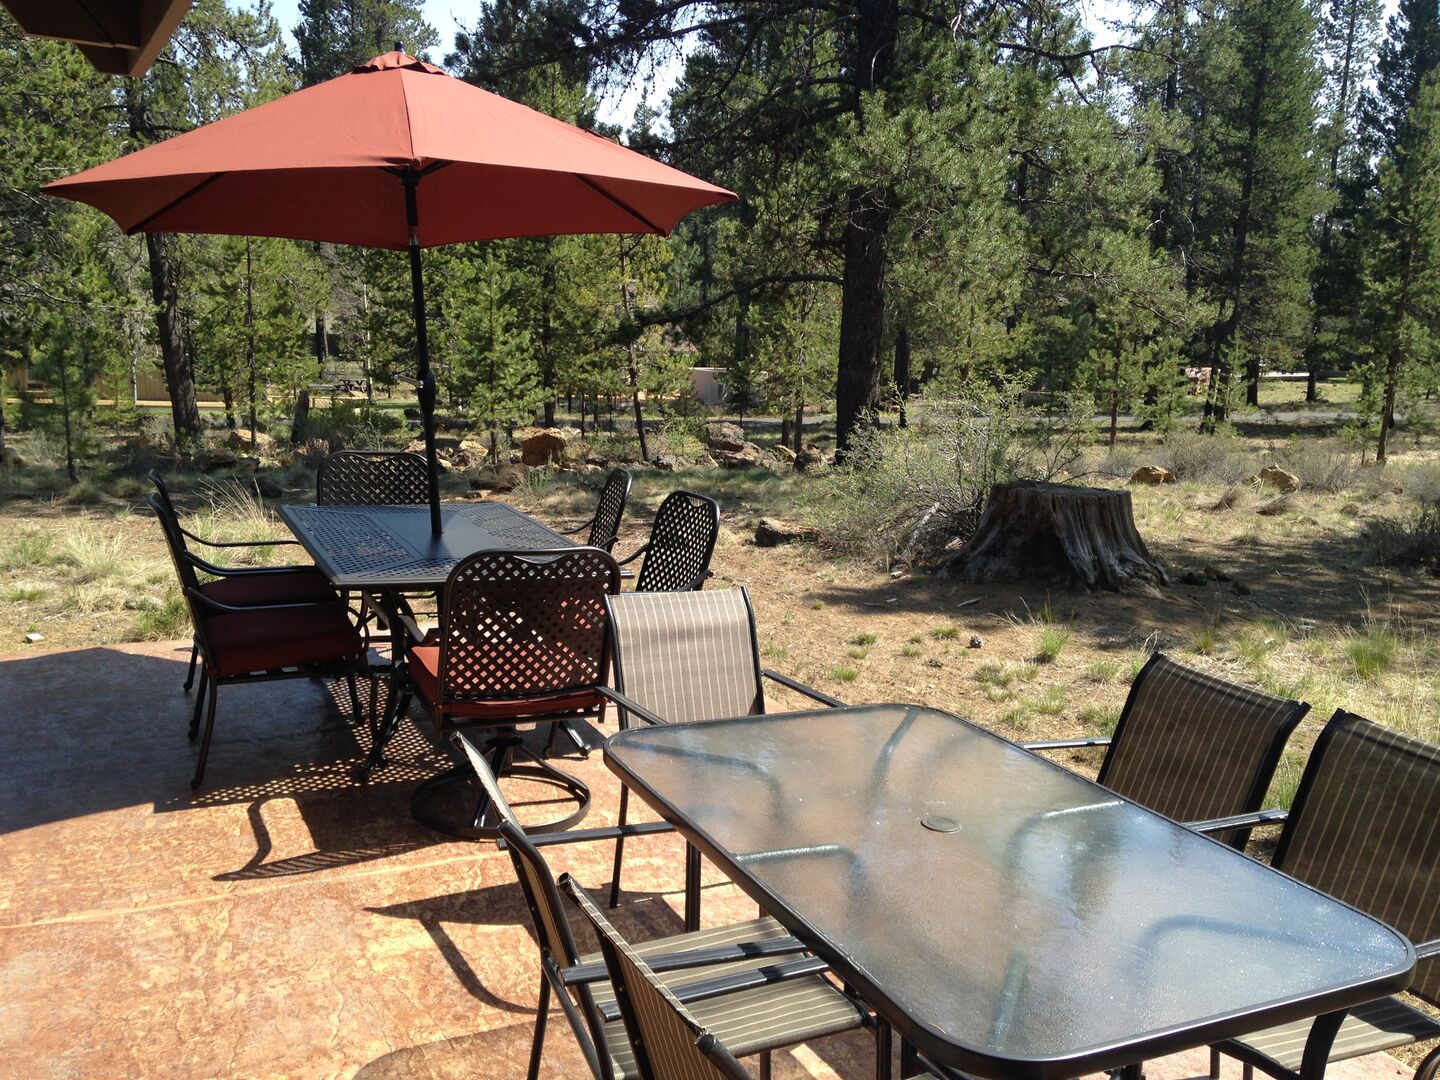 Patio with comfortable furniture and plenty of seating - great views!